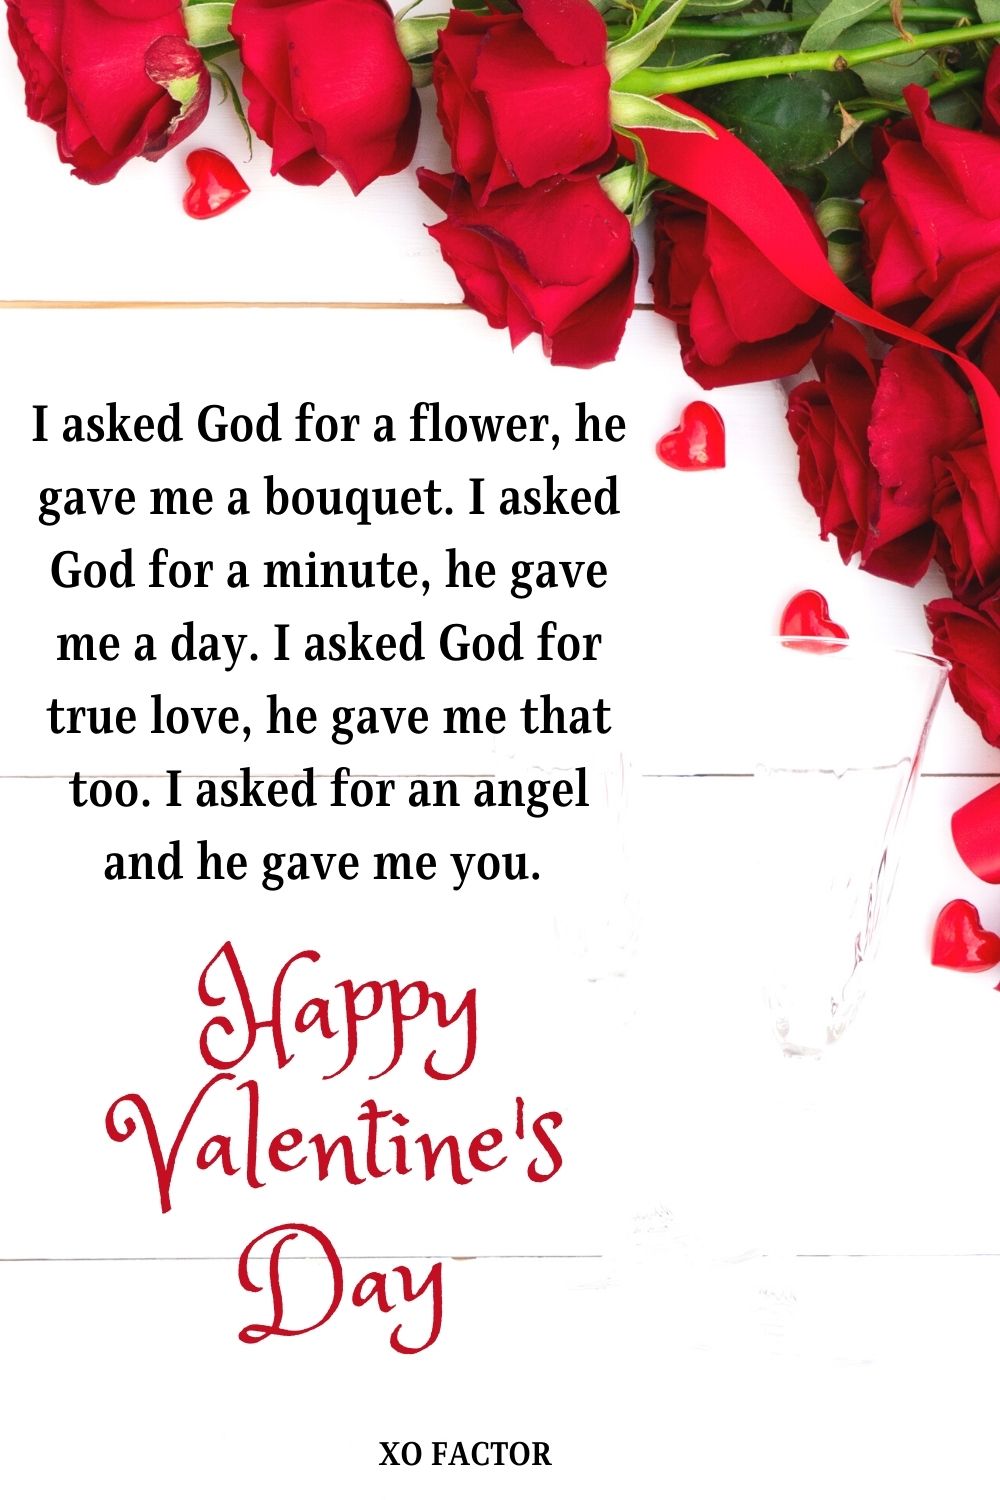 I asked God for a flower, he gave me a bouquet. I asked God for a minute, he gave me a day. I asked God for true love, he gave me that too. I asked for an angel and he gave me you. Happy Valentine’s Day!